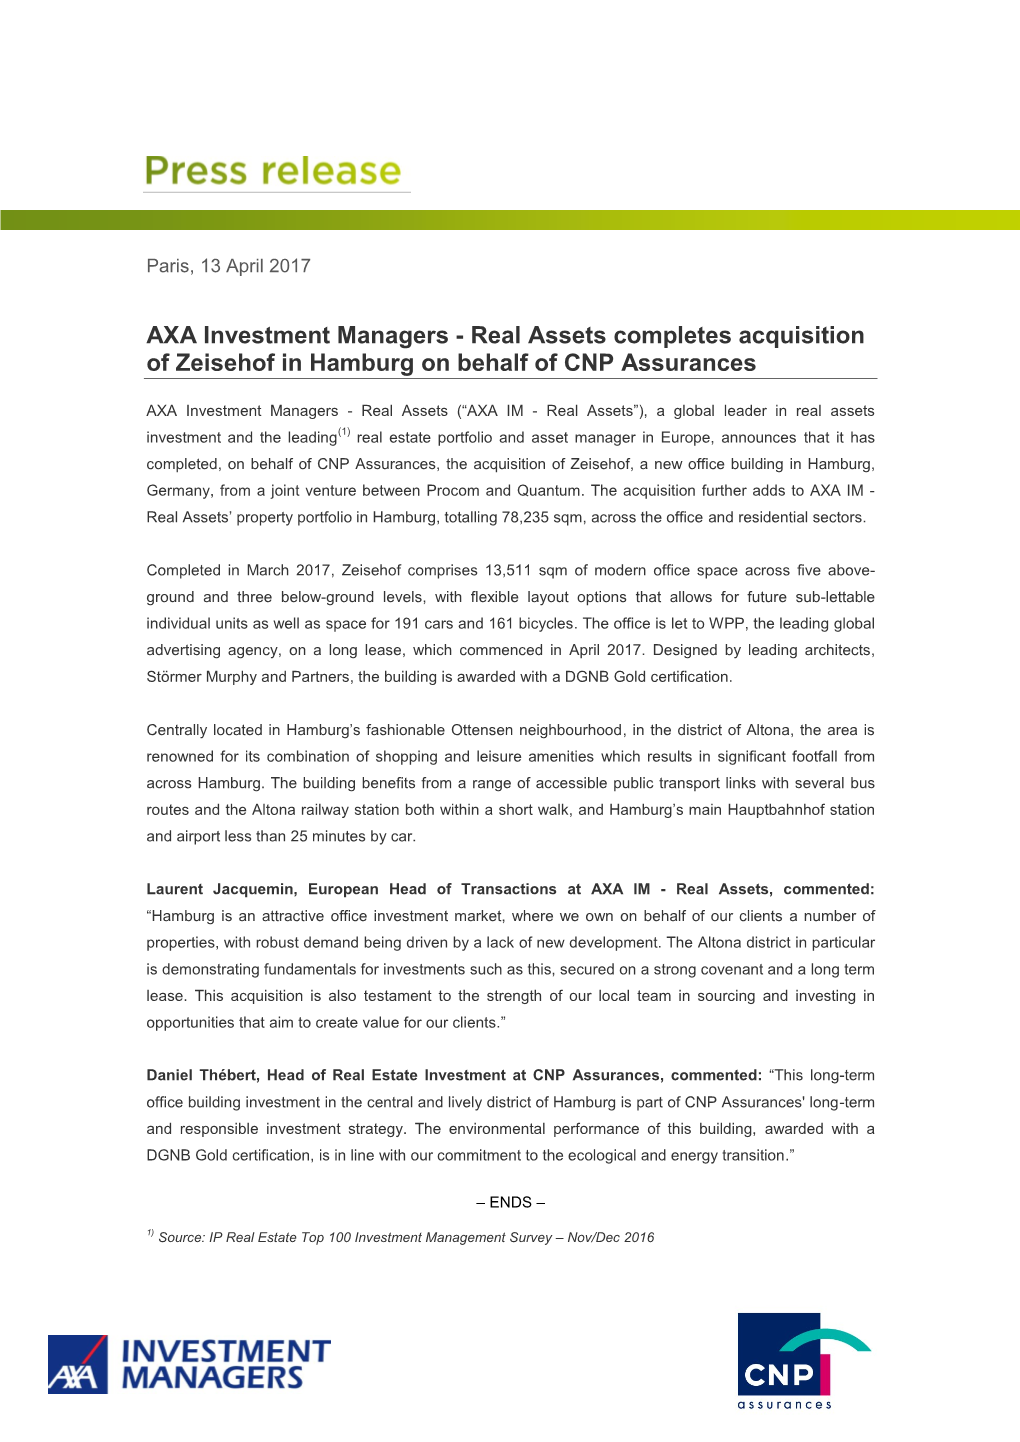 Real Assets Completes Acquisition of Zeisehof in Hamburg on Behalf of CNP Assurances